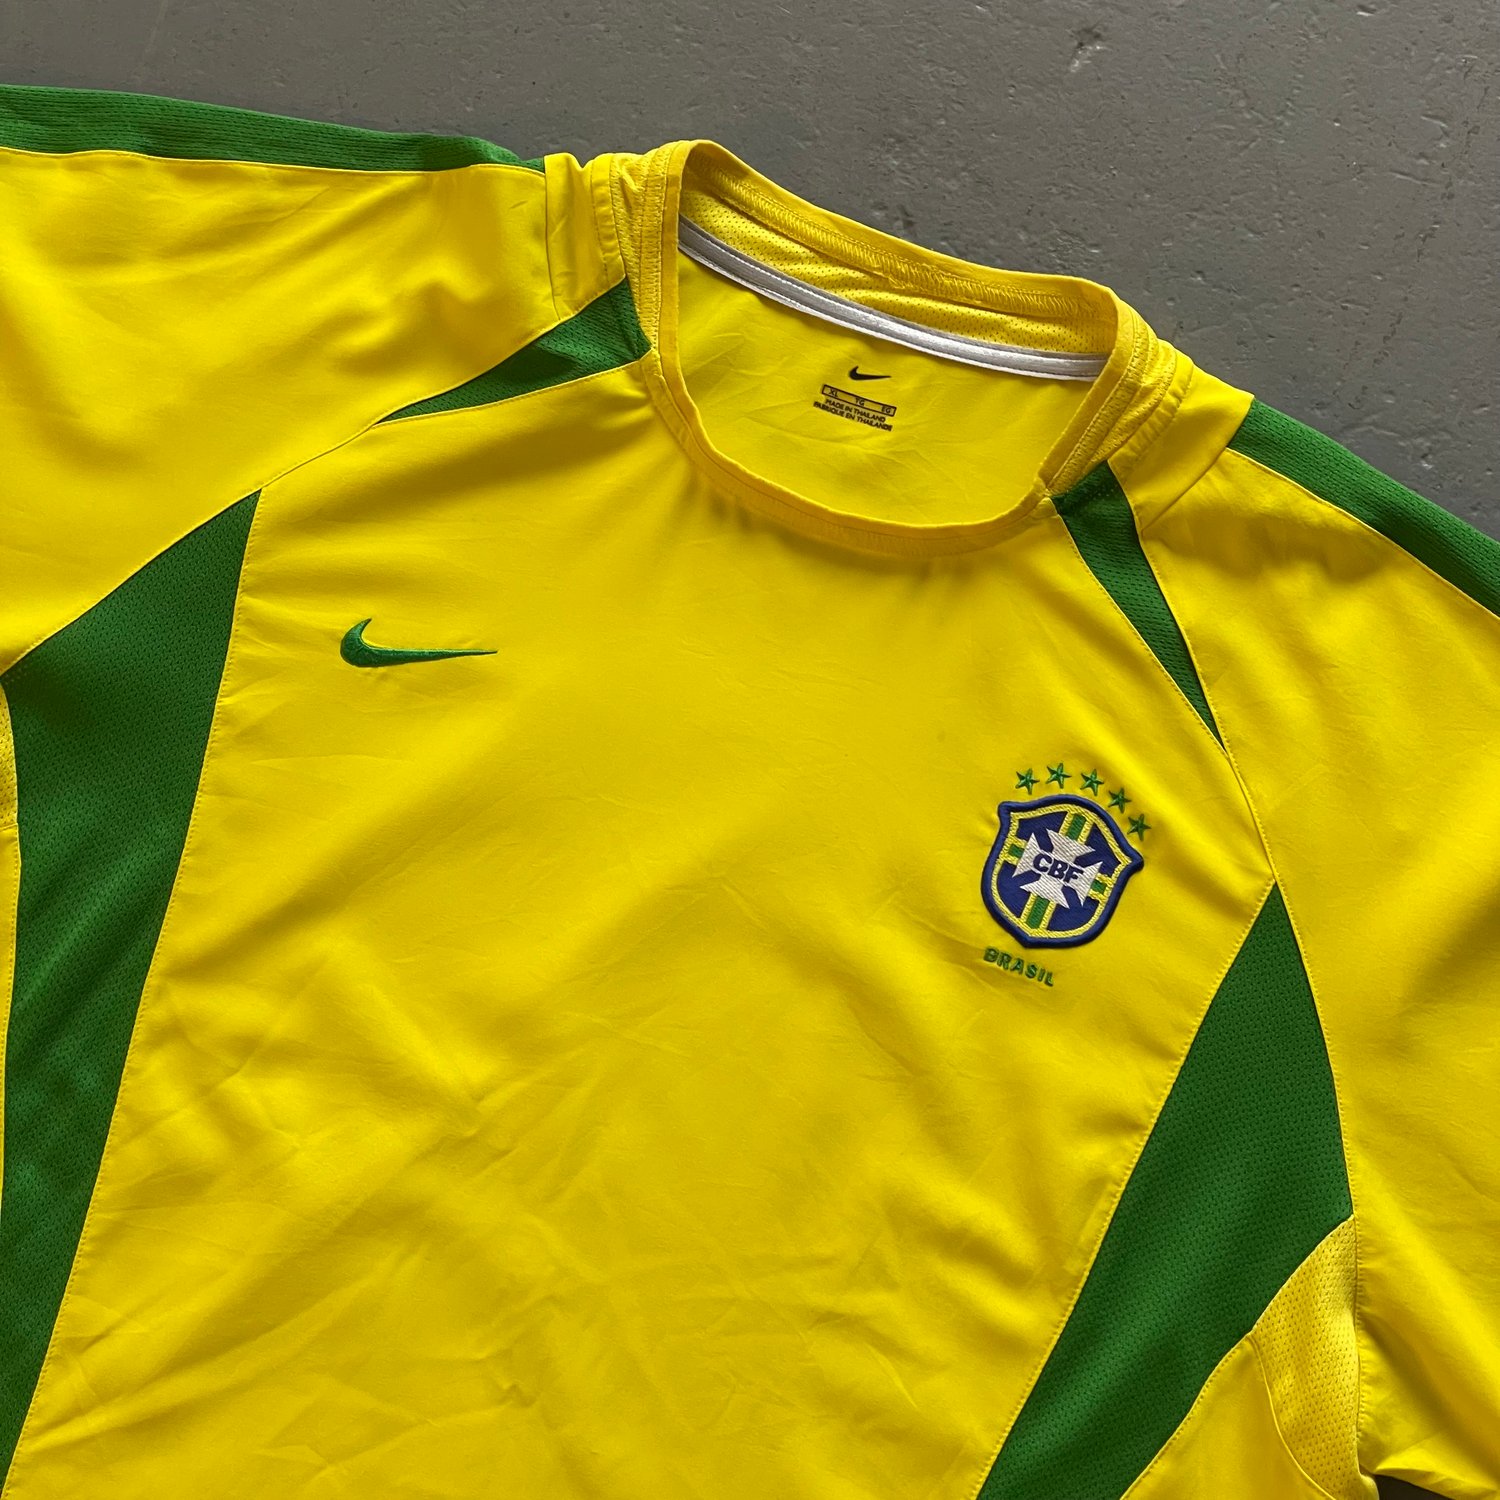 Image of 2002 World Cup Brazil home shirt size xl 